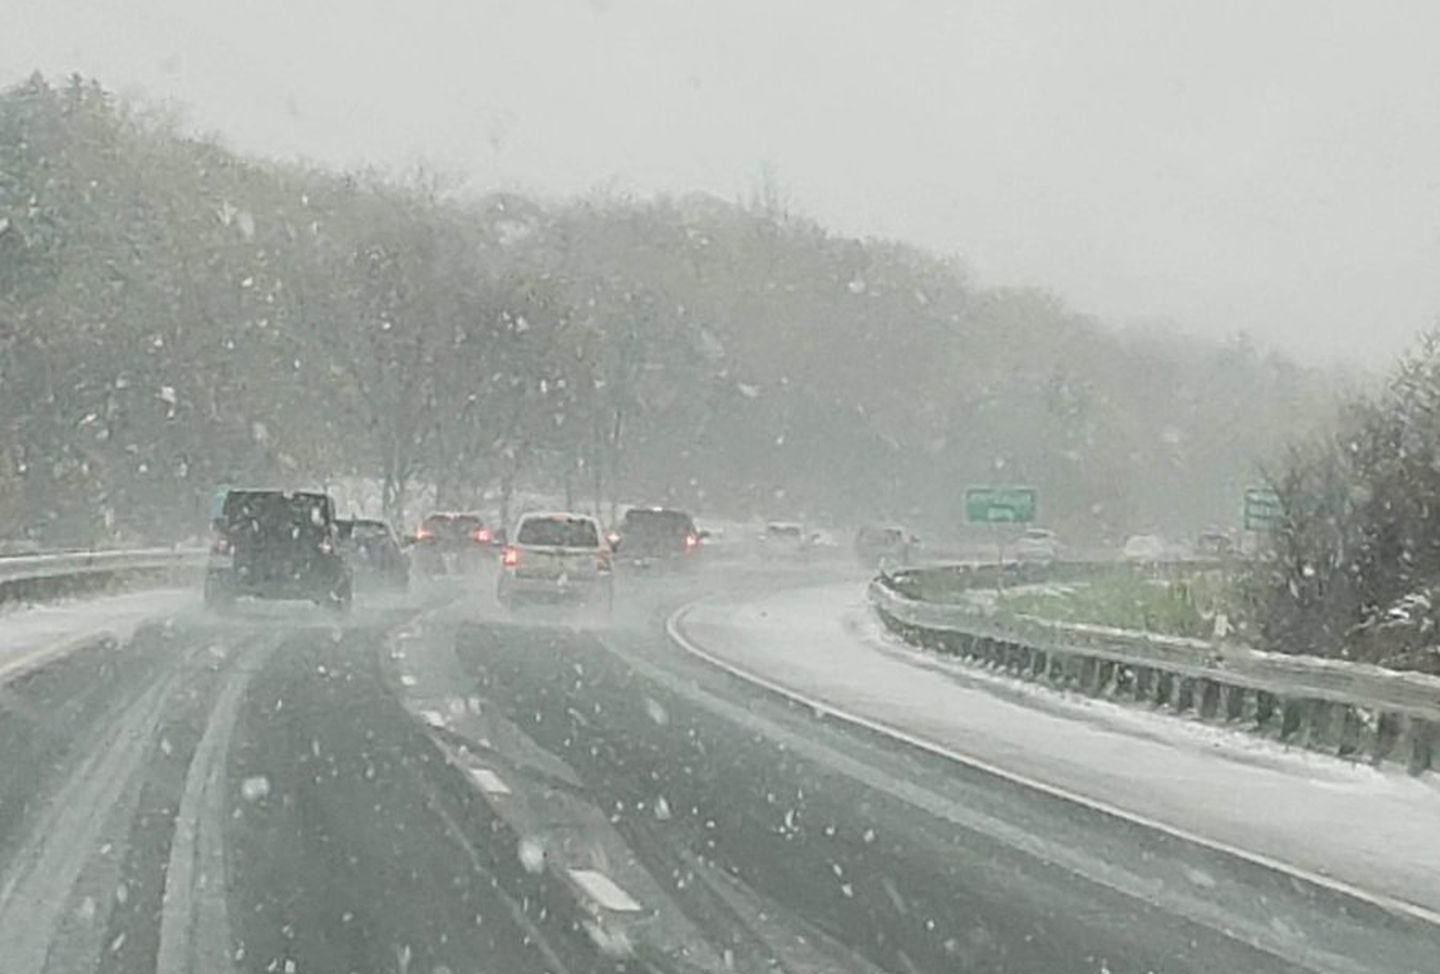 Snow could be seen on the Massachusetts